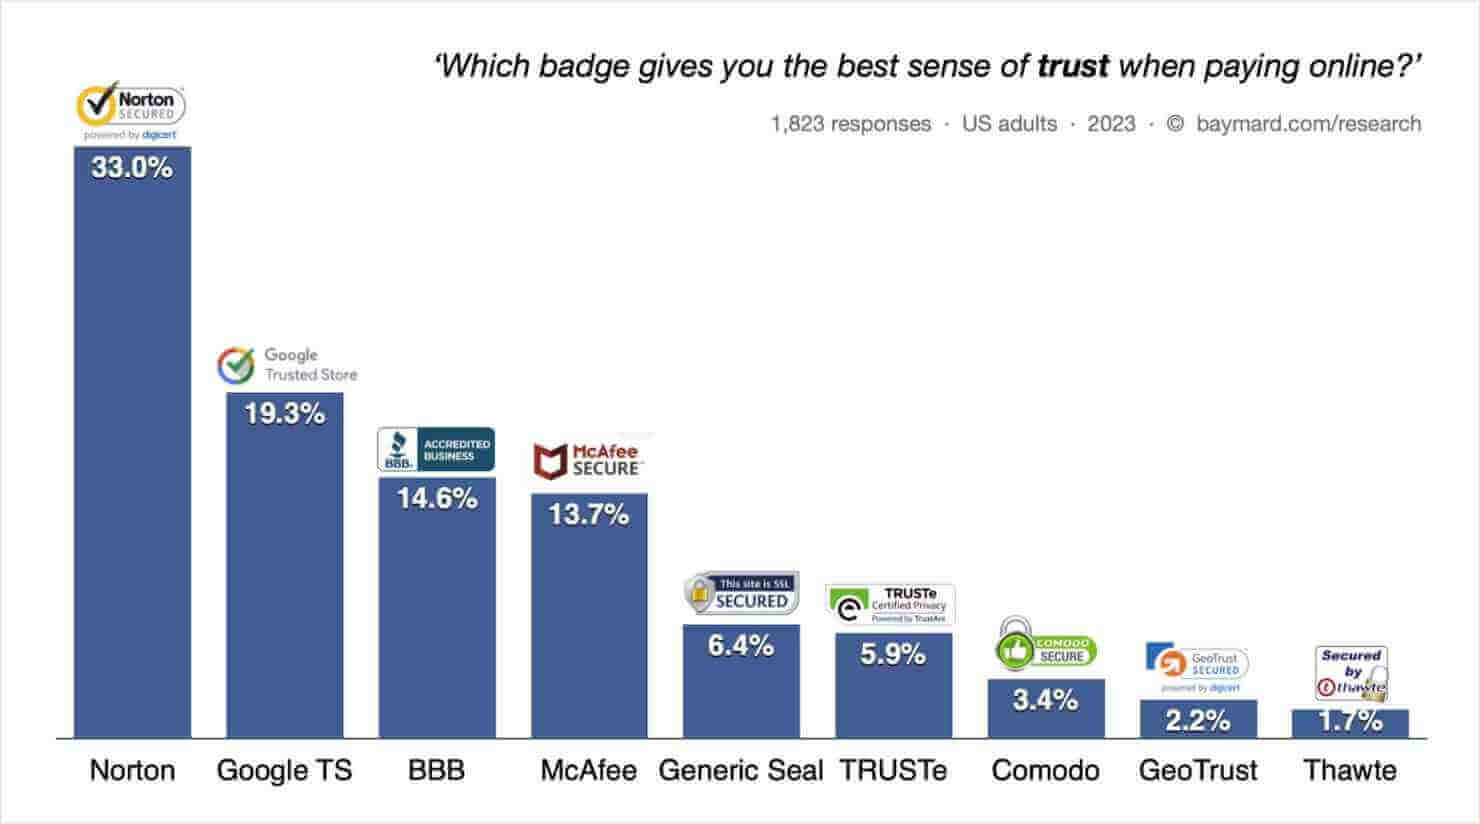 "Which badge give you the best sense of trust when paying online? 1823 responses, US adults, 2023, baymard.com/research. Chart shows: Norton 33%, Google Trusted Source 19.3%, BBB Accredited Business 14.6%, McAgee Secure 13.7, General Seal 6.4%, TRUSTe 5.9%, Comodo Secure 3.4%, GeoTrust Secure 2.2%, Thawte 1.7%